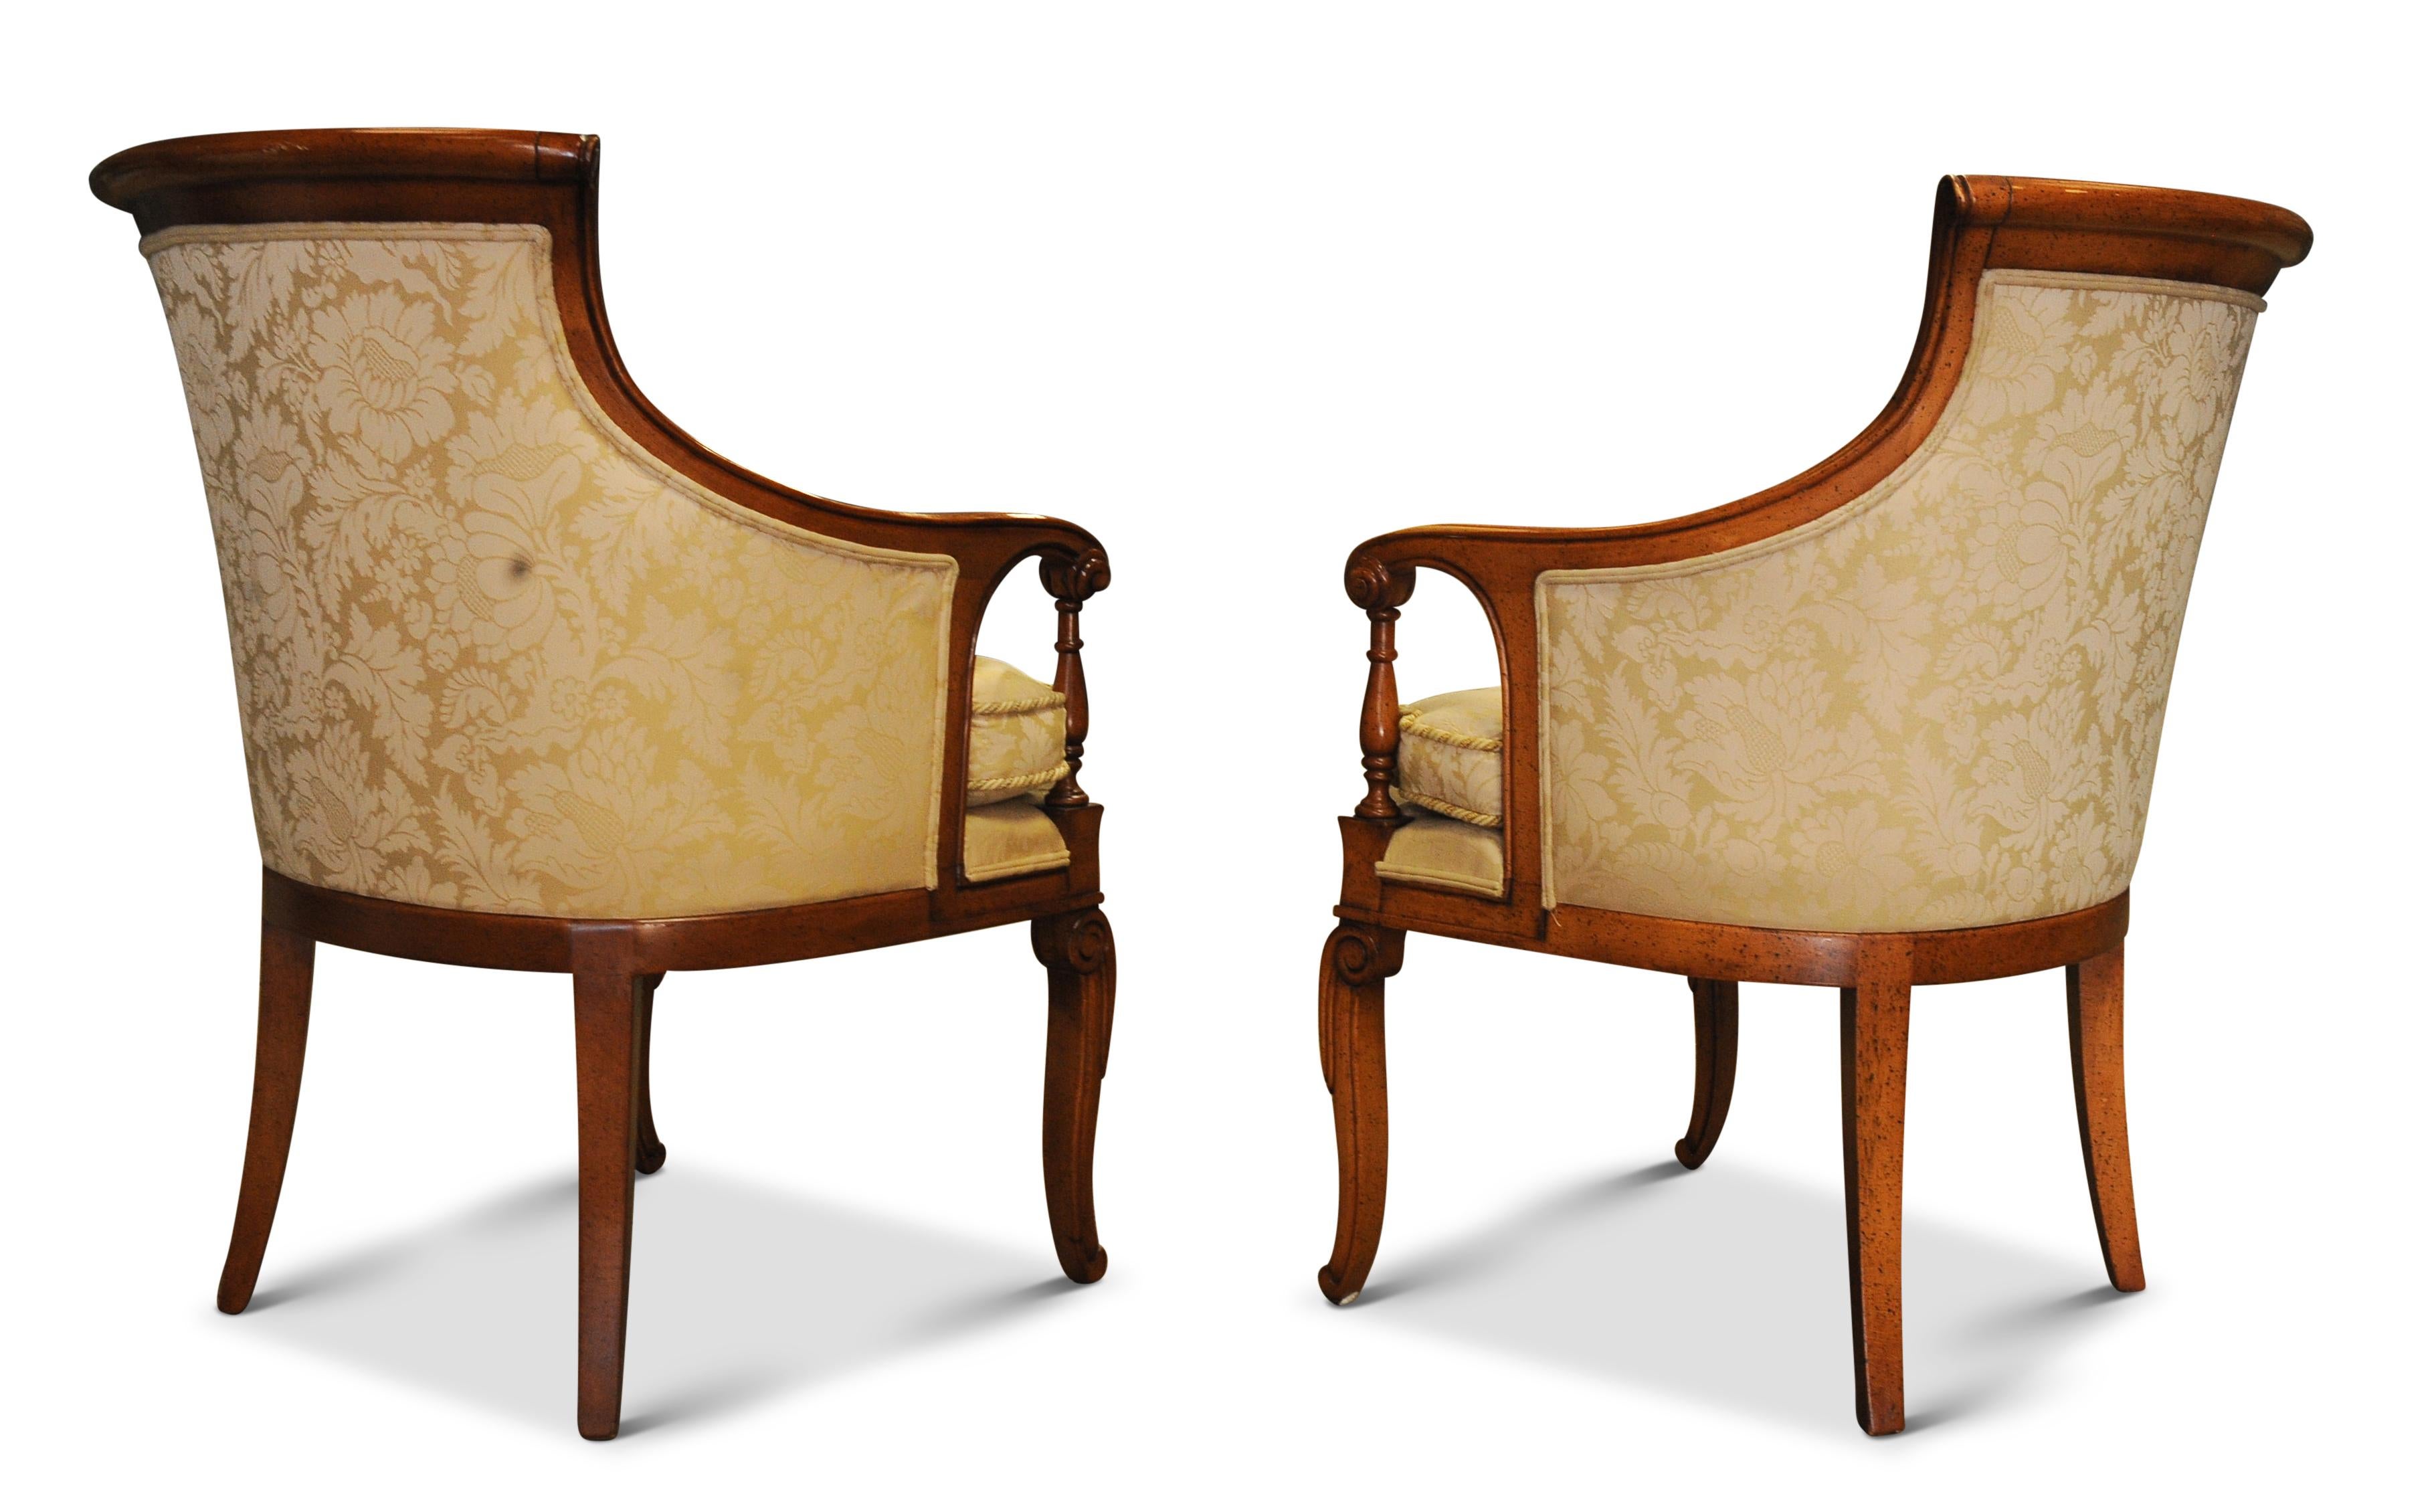 Elegant Pair of William IV Design Bergere Armchairs With Cream Damask Upholstery For Sale 2